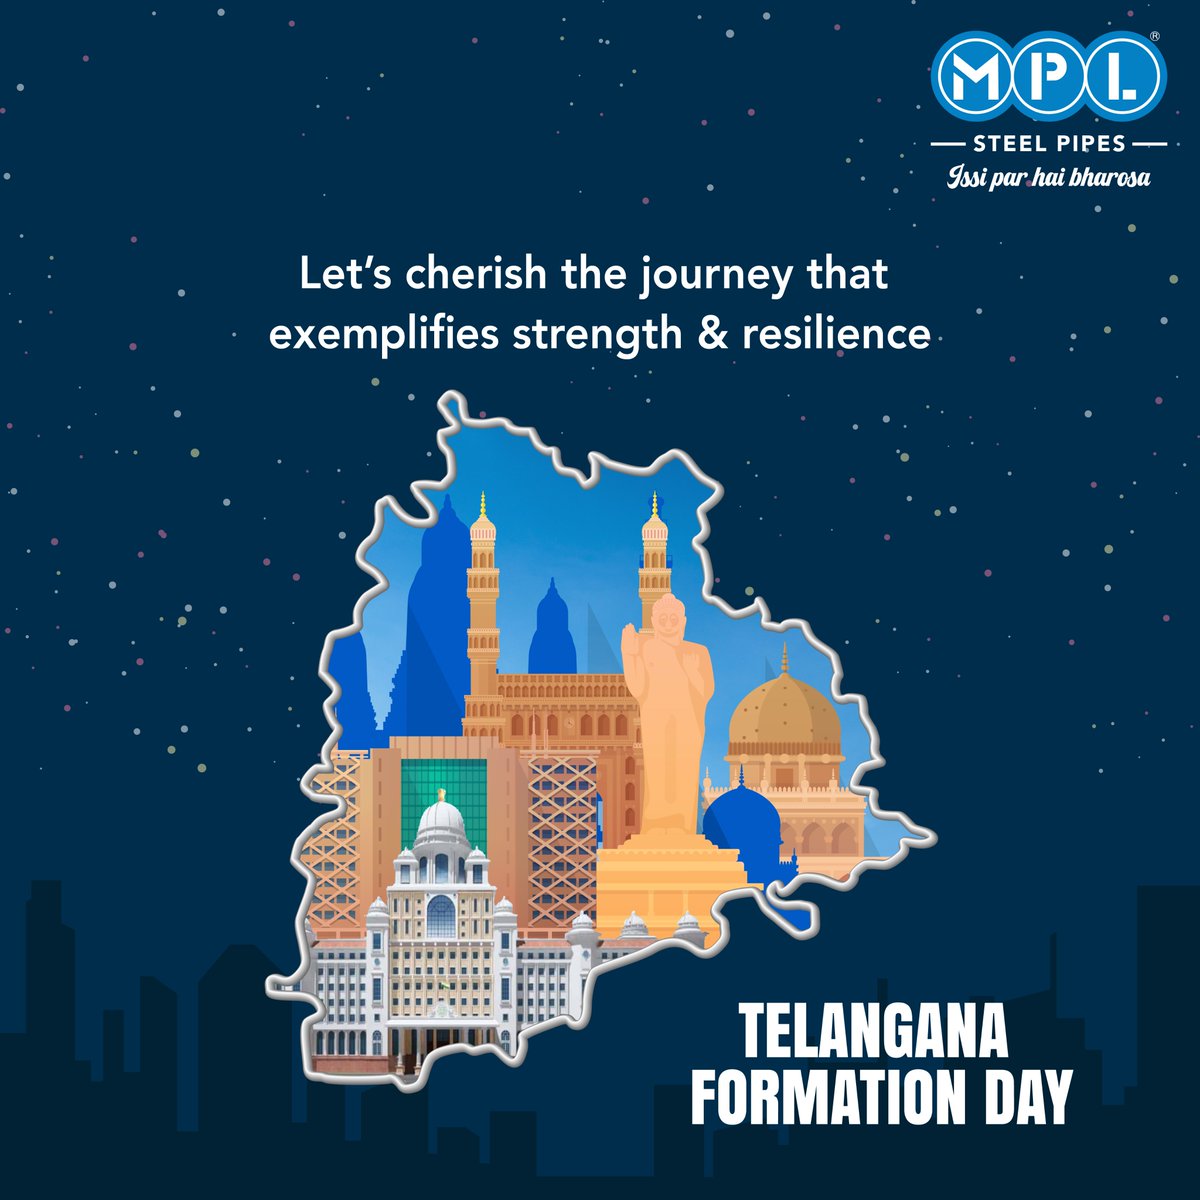 Let's commemorate the indomitable spirit of Telangana and cherish the milestones achieved, forging ahead with unwavering determination. 

#MPLSteelPipes #IssiParHaiBharosa #steelindustry #Pipes #mspipes #steel #SteelPipes #durabilty #strength #Telangana #TelanganaFormationDay